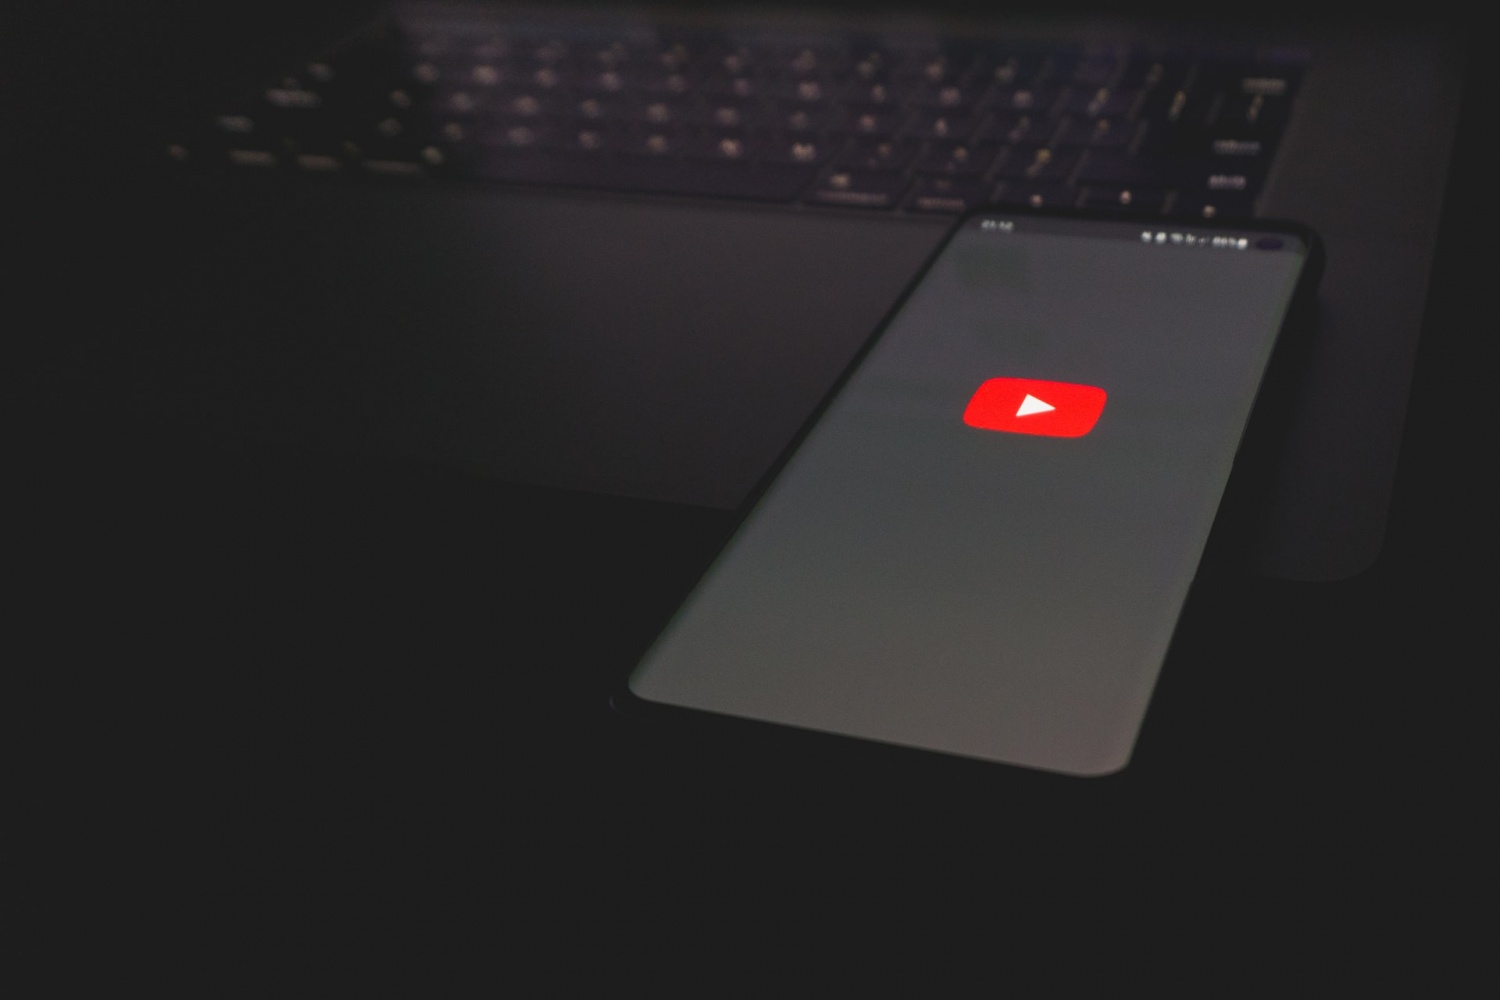 Russian Speaking Hackers Attack YouTube Channels to Livestream Crypto Scams, Google's Threat Analysis Group Reports